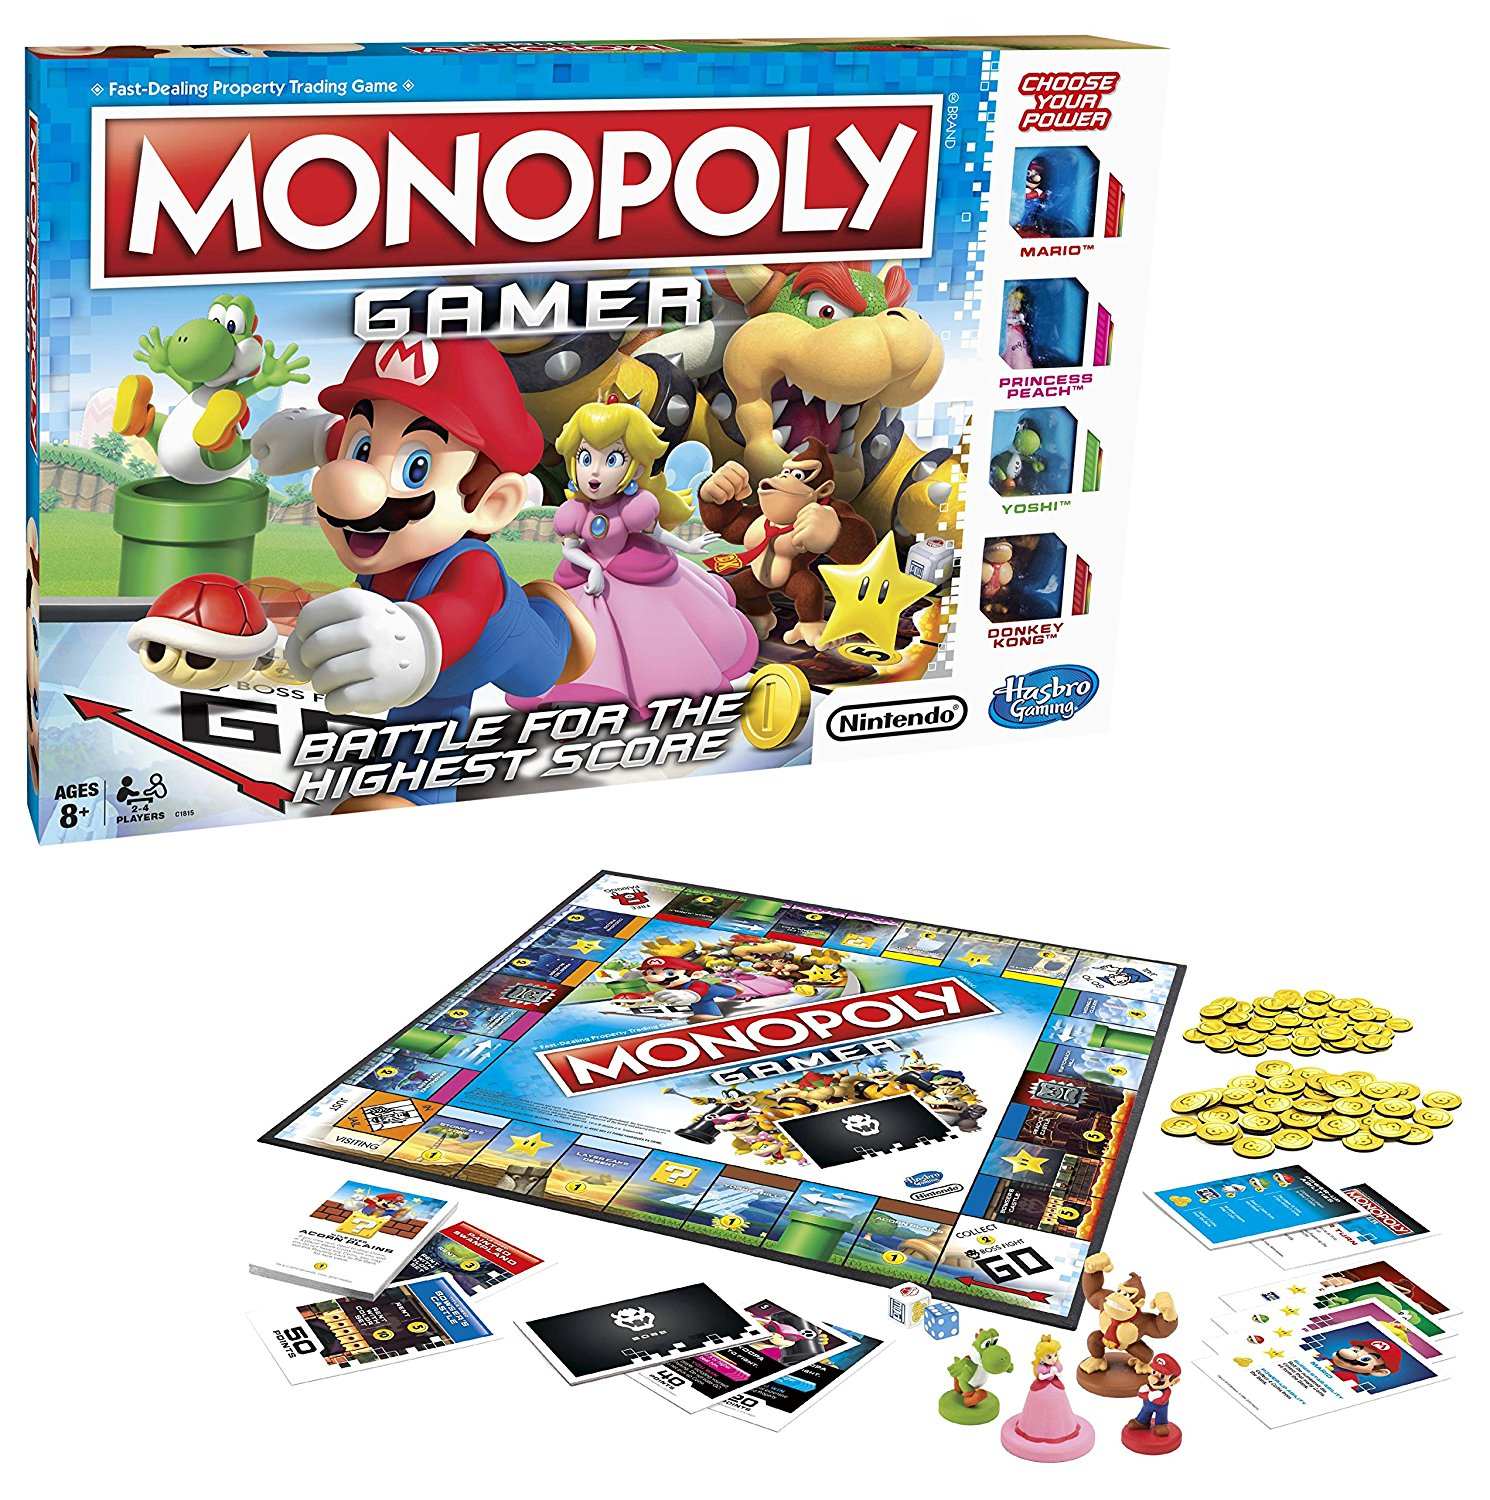 Amazon: Monopoly Gamer Only $13.56!